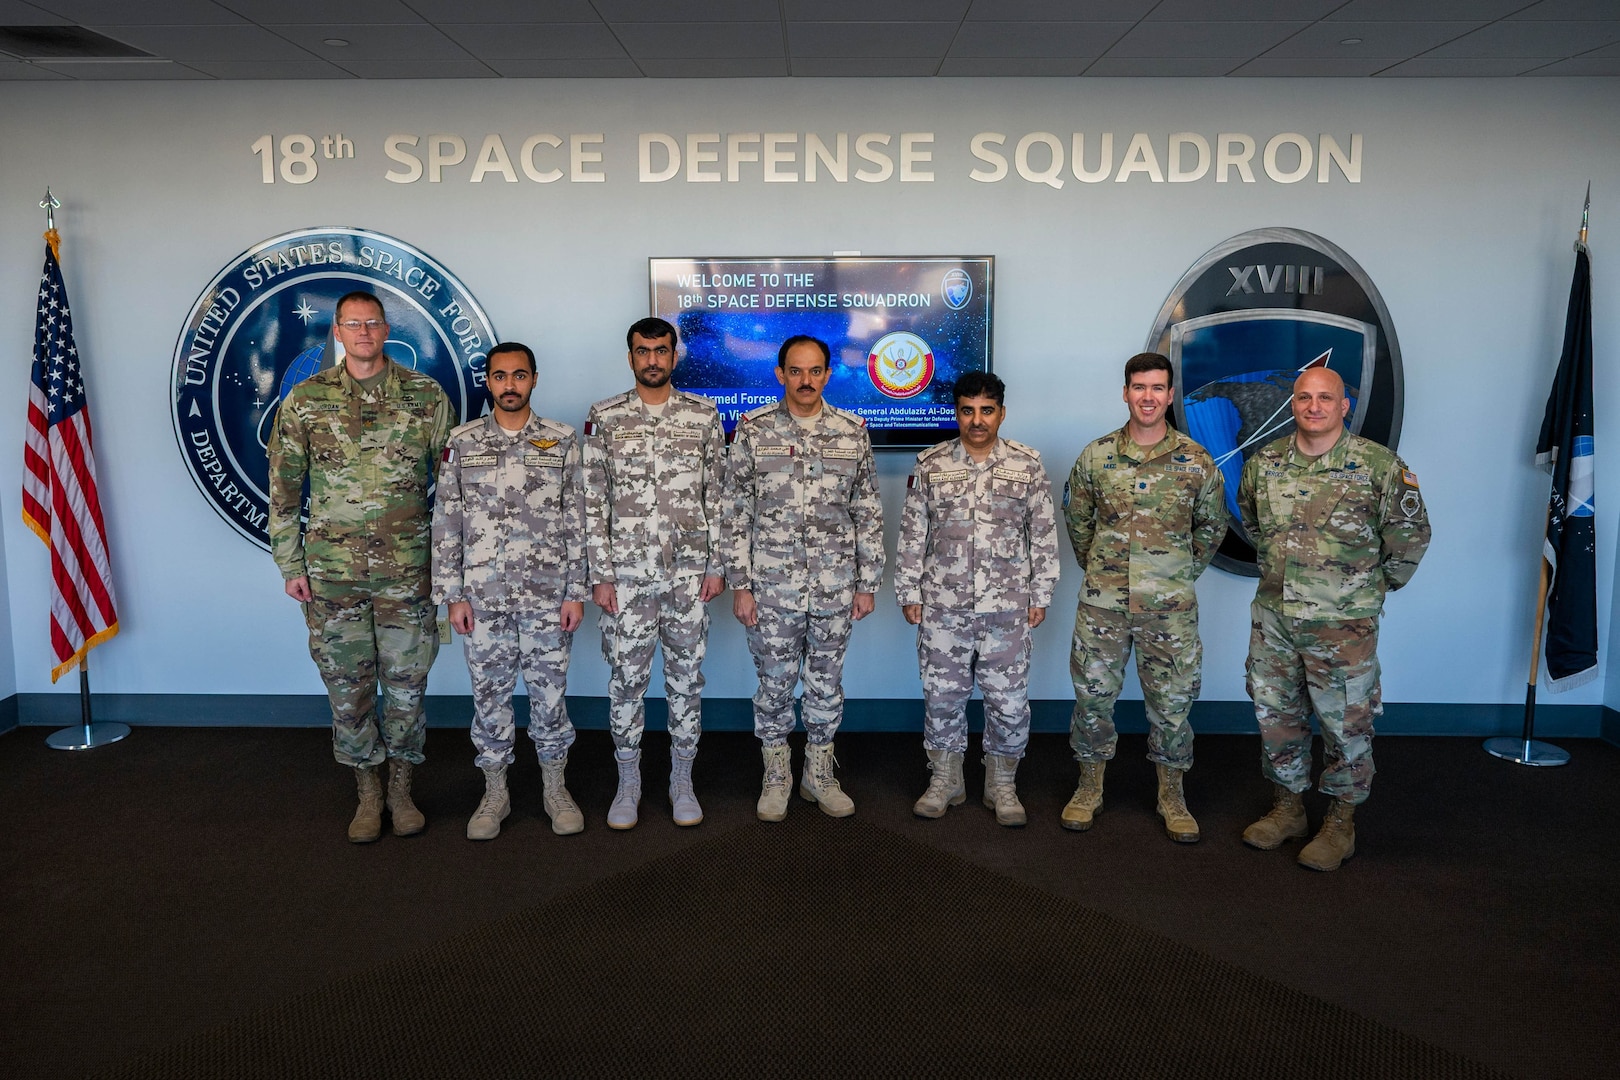 U.S. military member and Qatari Armed Forces members stand together for a group photo.